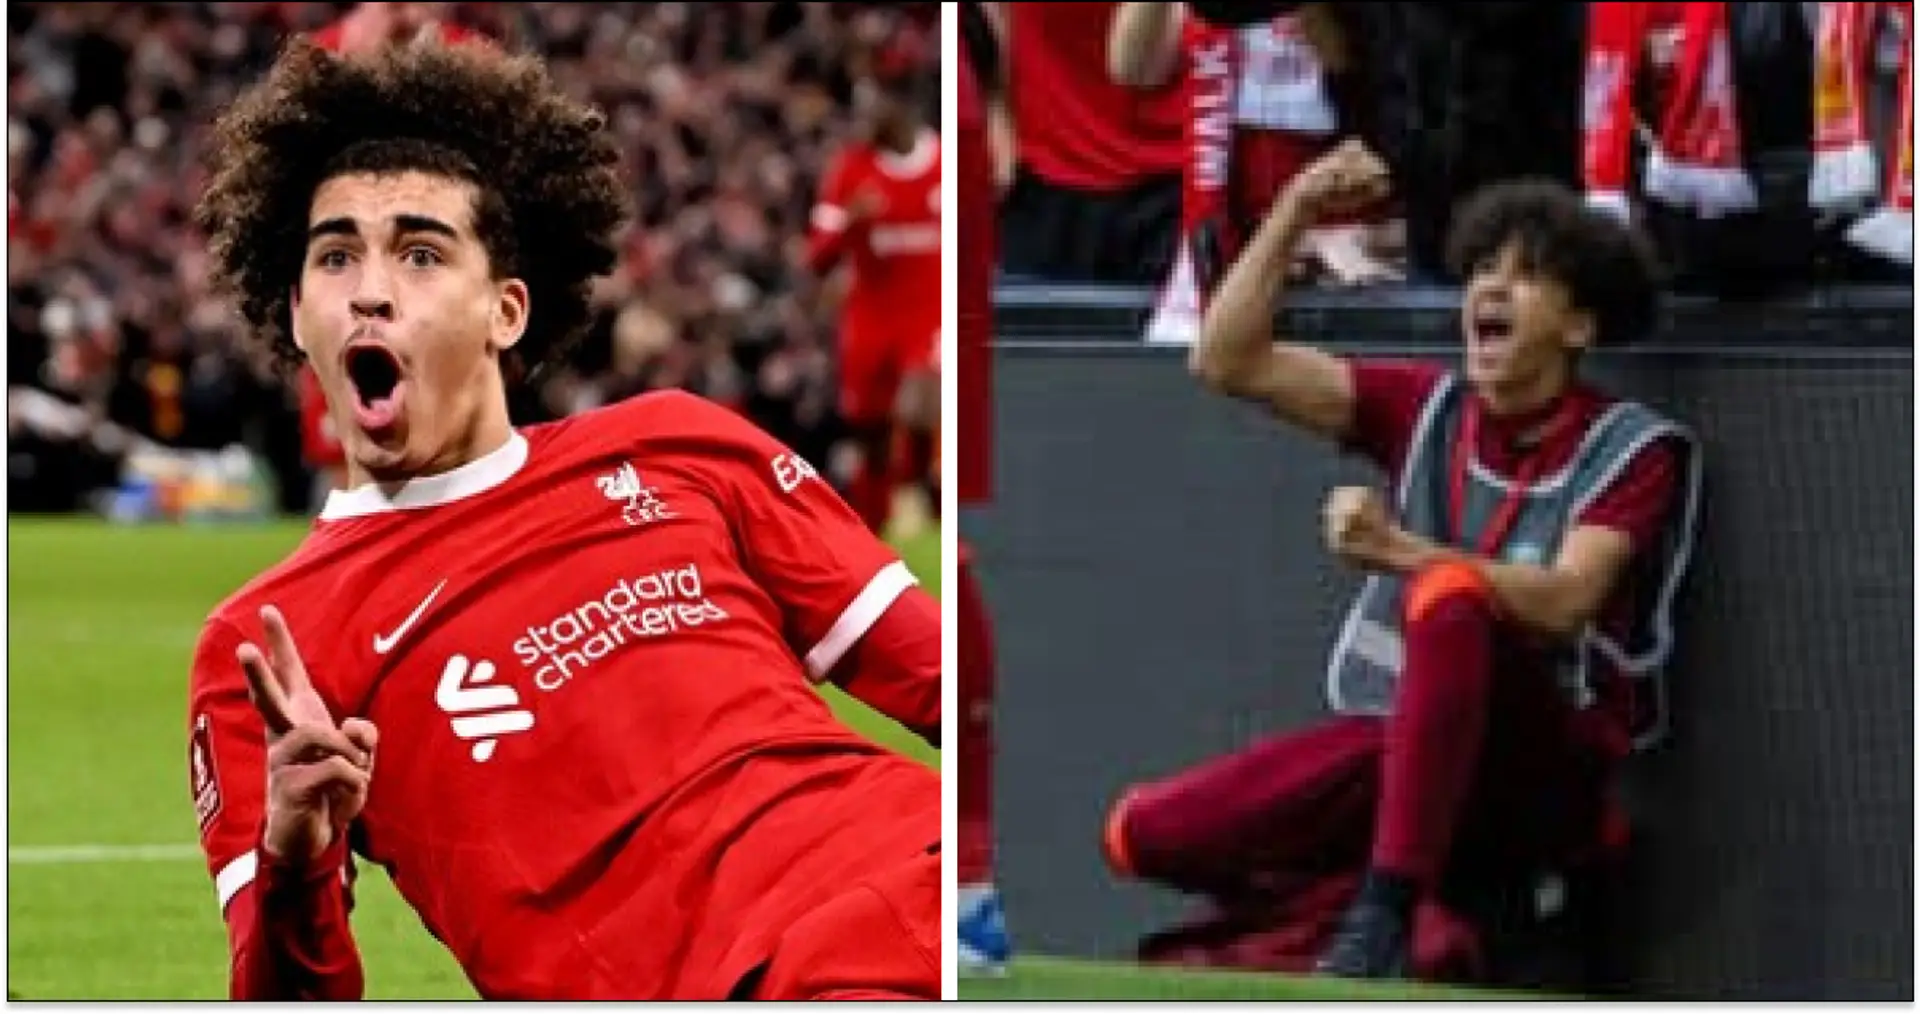 Jayden Danns picture celebrating Liverpool goal as Anfield ball boy goes viral after youngster opens Reds account